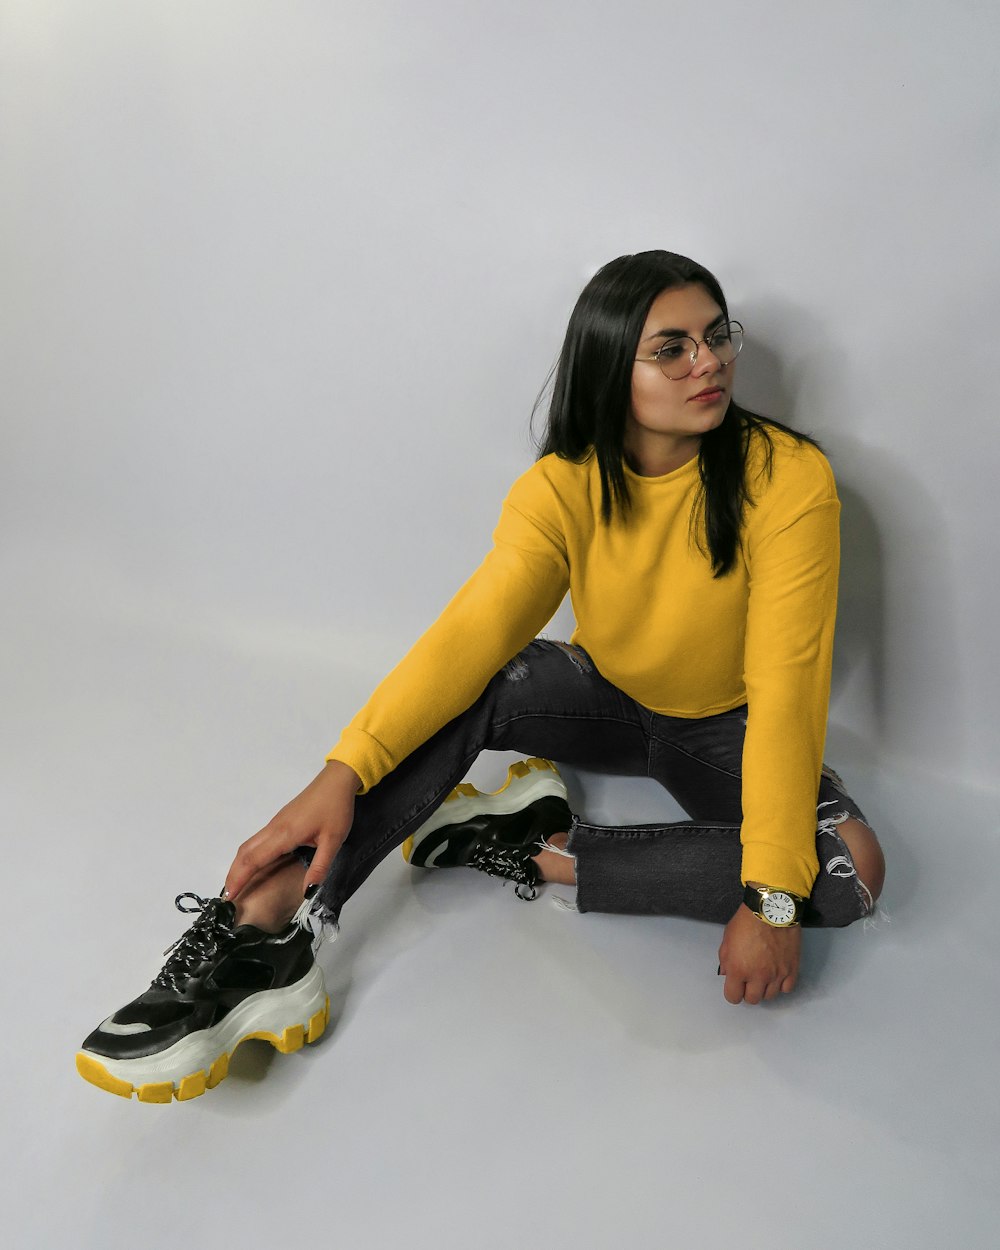 woman in yellow long sleeve shirt and black pants sitting on white floor